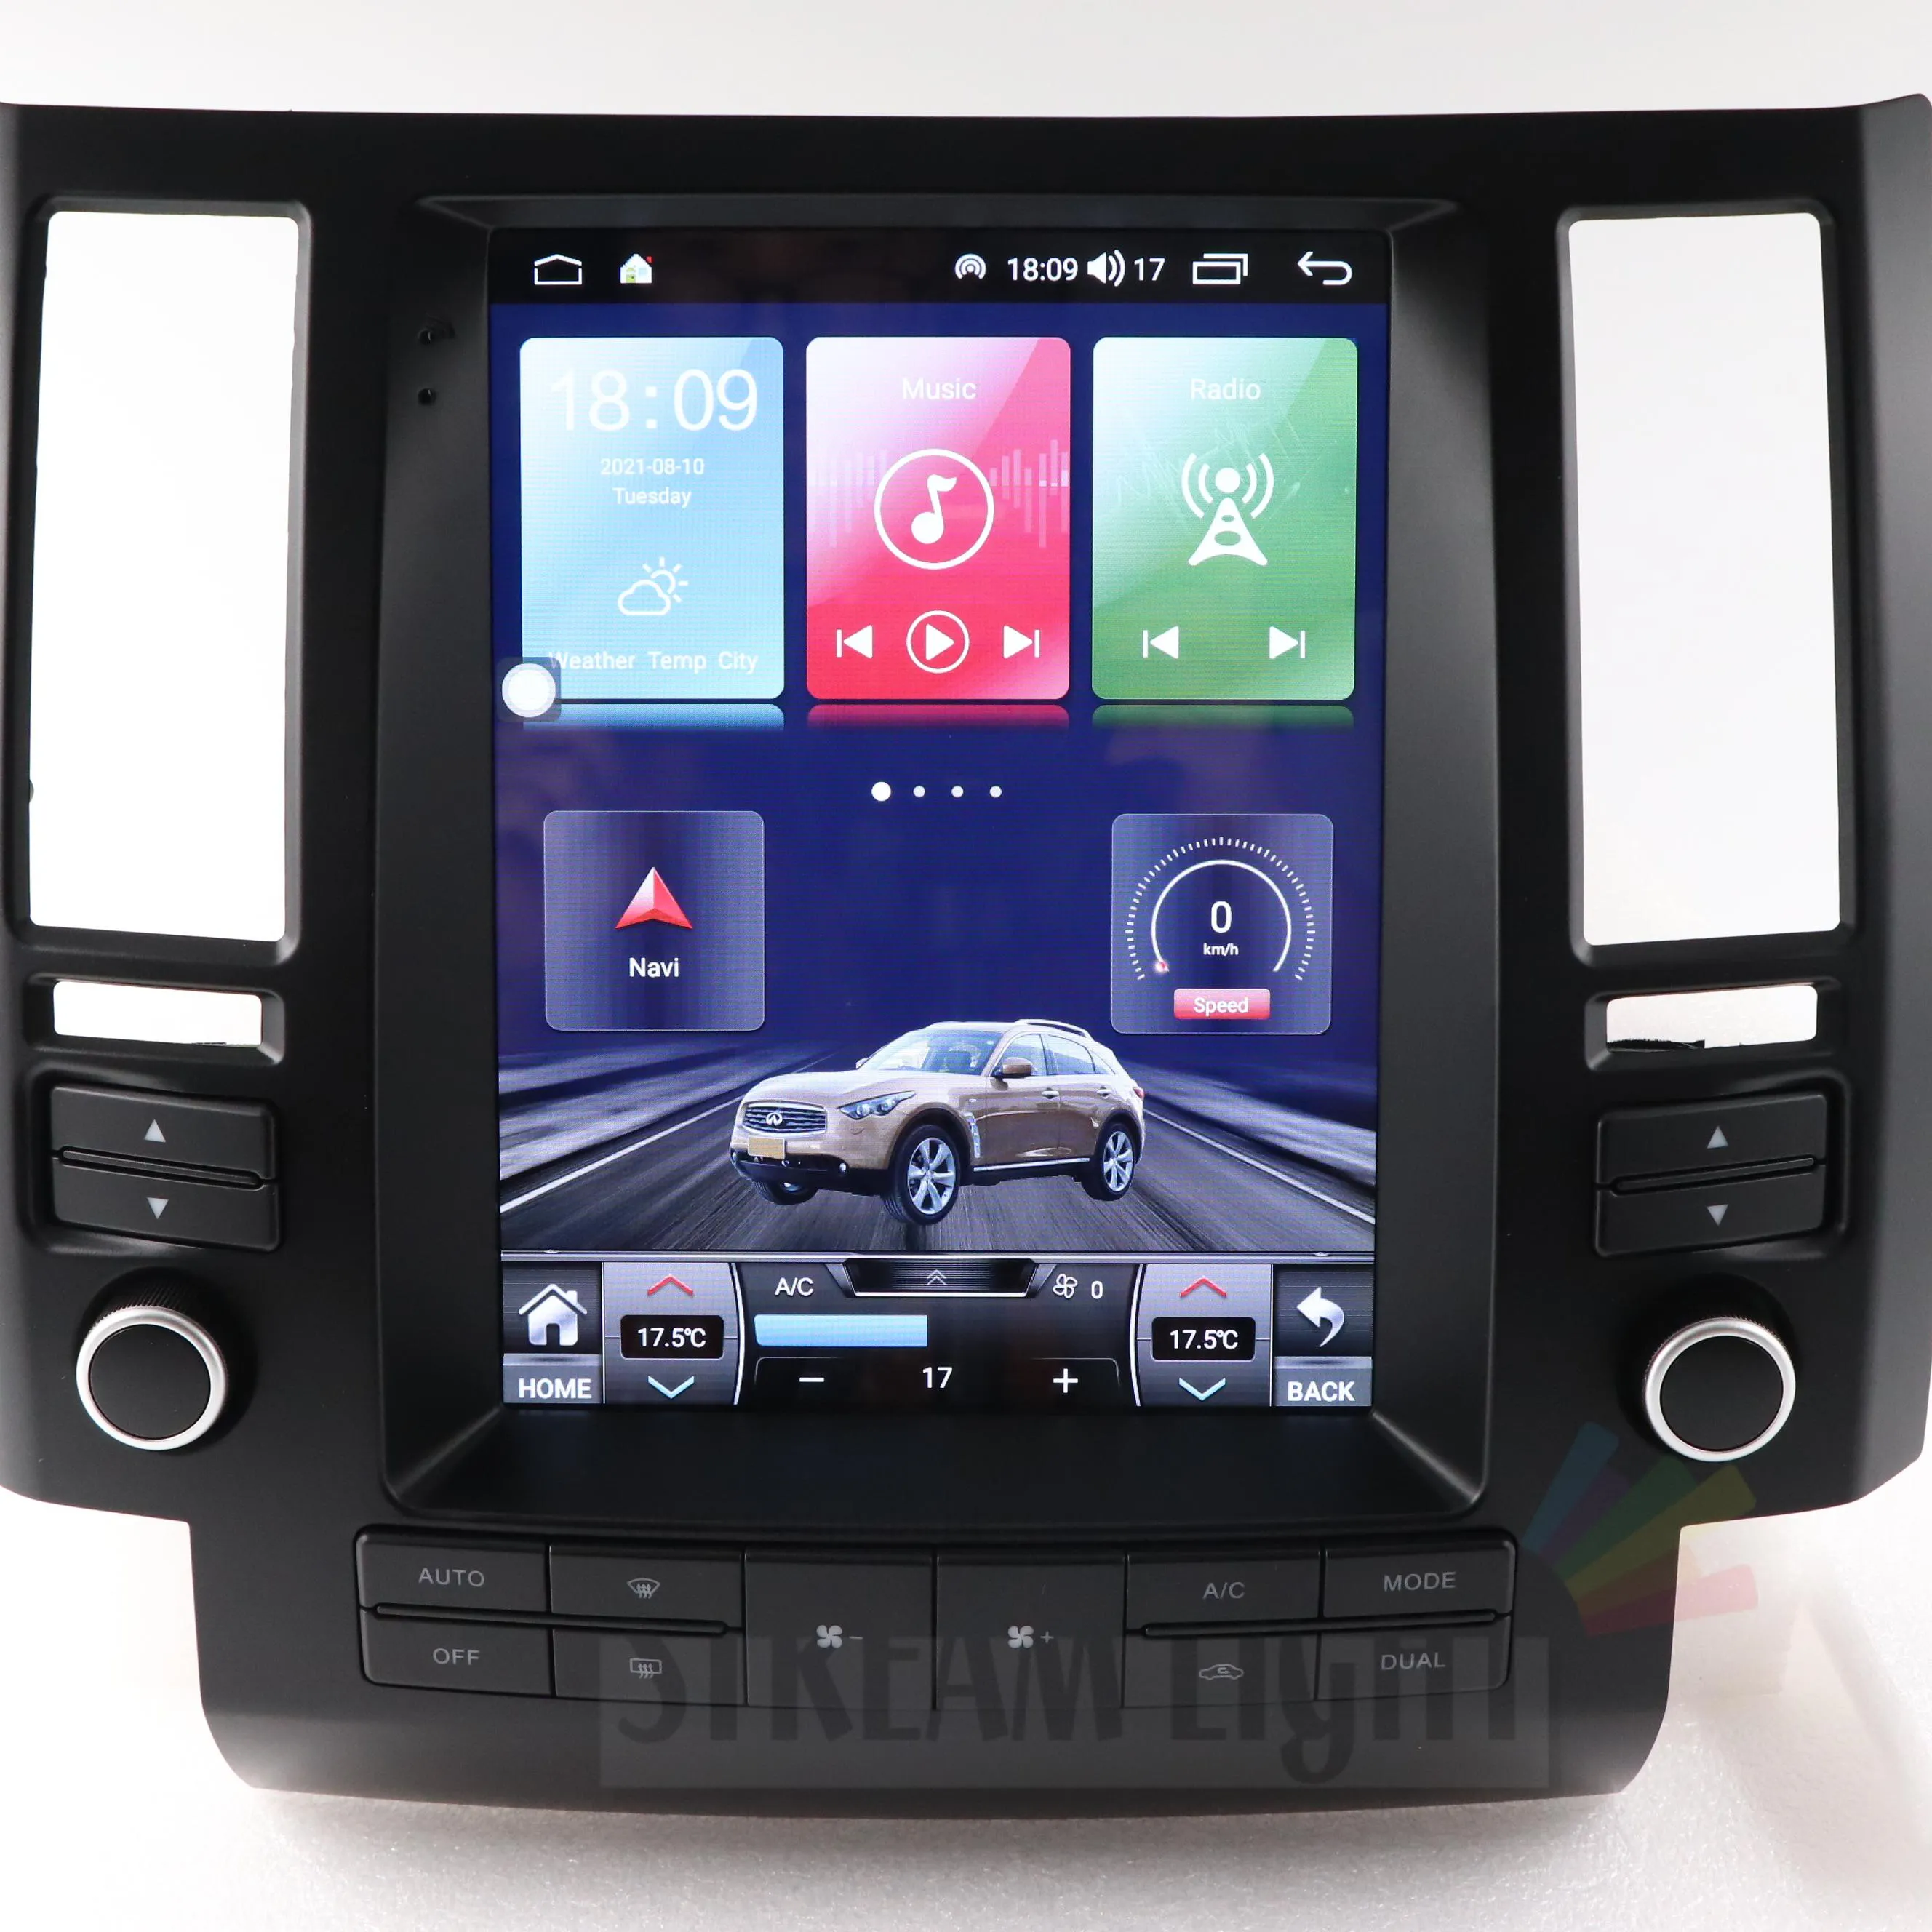 Android 10 Vertical 9.7 inch touch screen Car radio GPS Navigation Multimedia video Car DVD Player for Infiniti FX35 03-06